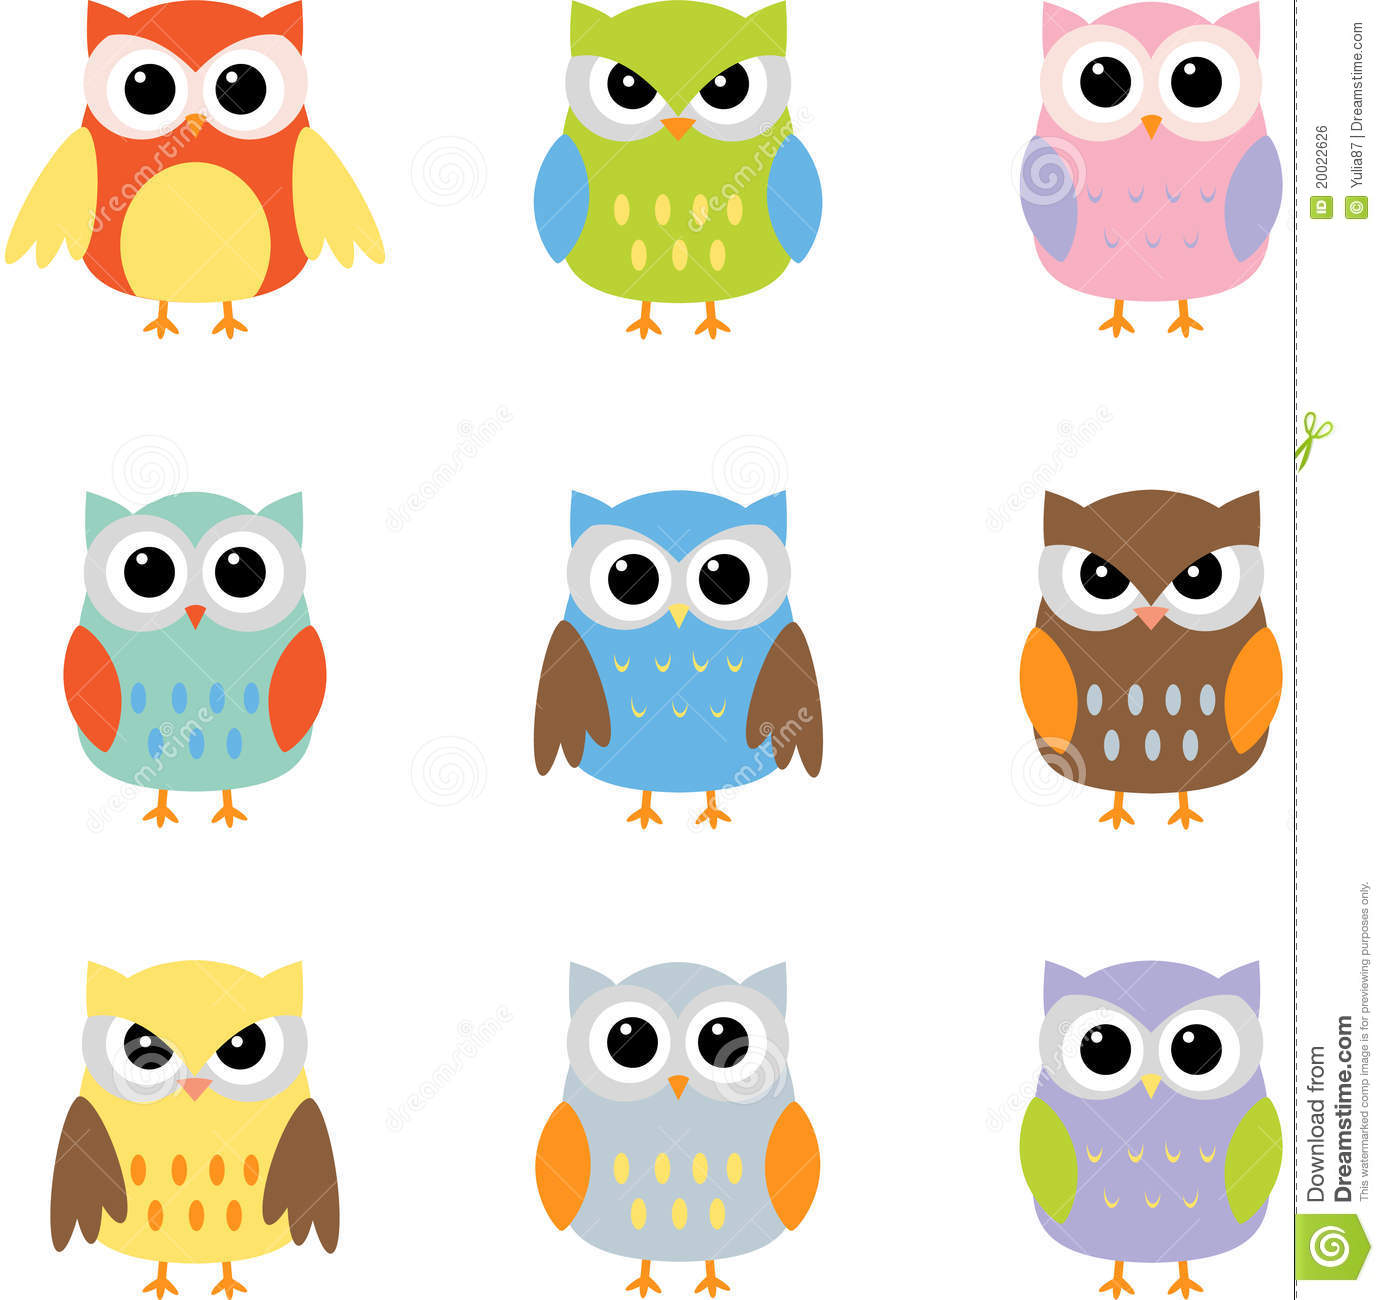 Color owls clip art royalty free stock image image